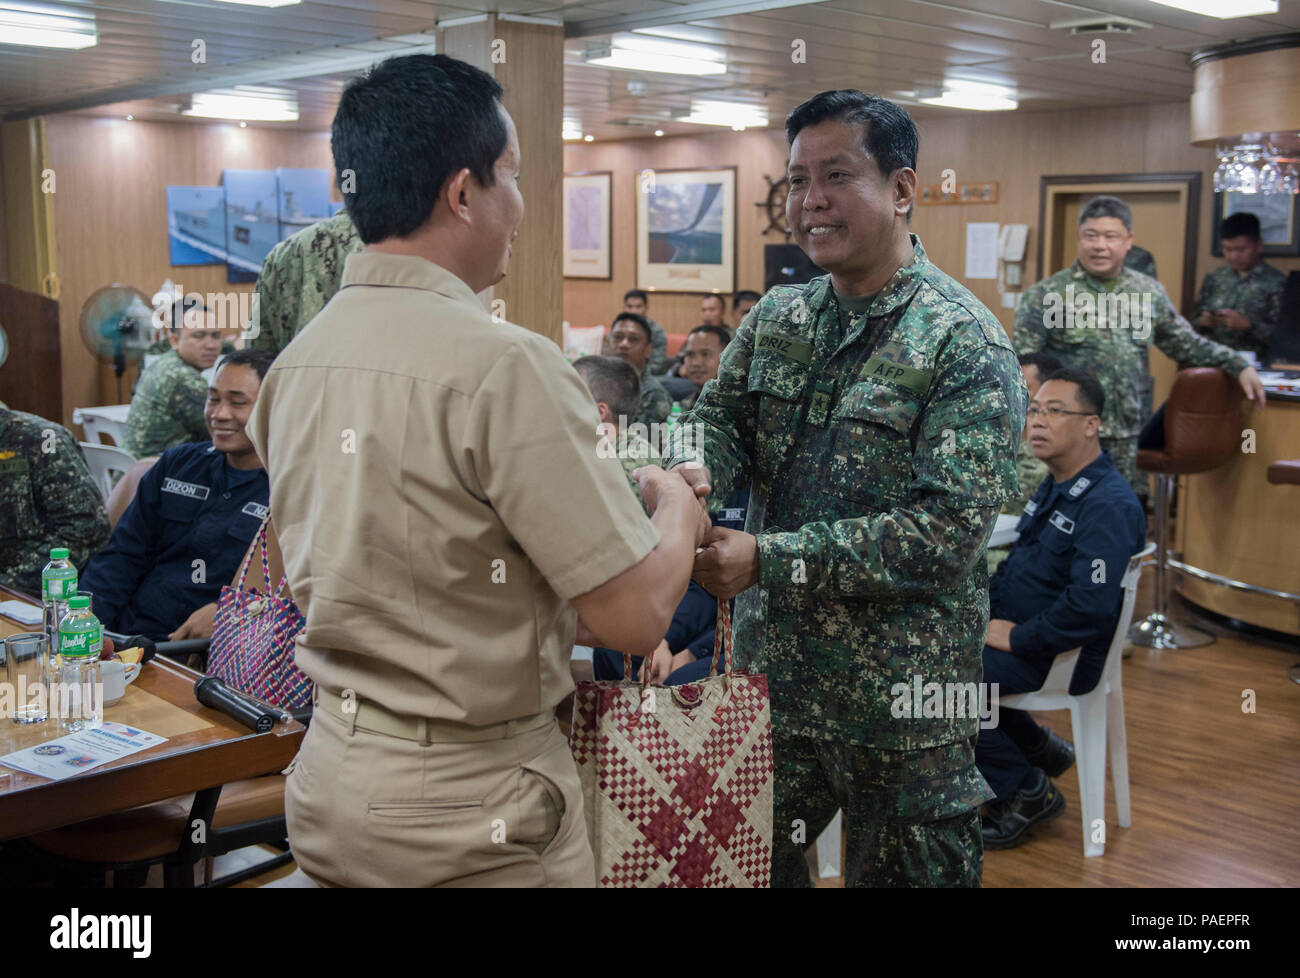 180714-N-OU129-194 SAN FERNANDO CITY, Philippines (July 14, 2018) Captain Erwin Lao, commanding officer of USNS Millinocket (T-EPF 3), exchanges gifts with Philippine Navy Commodore Nichols Driz, Commander, Naval Forces Northern Luzon, at the closing ceremony of Maritime Training Activity (MTA) Sama Sama 2018 aboard Philippine Navy ship BRP Tarlac (LD-601). The week-long engagement focuses on the full spectrum of naval capabilities and is designed to strengthen the close partnership between both navies while cooperatively ensuring maritime security, stability and prosperity. (U.S. Navy photo b Stock Photo